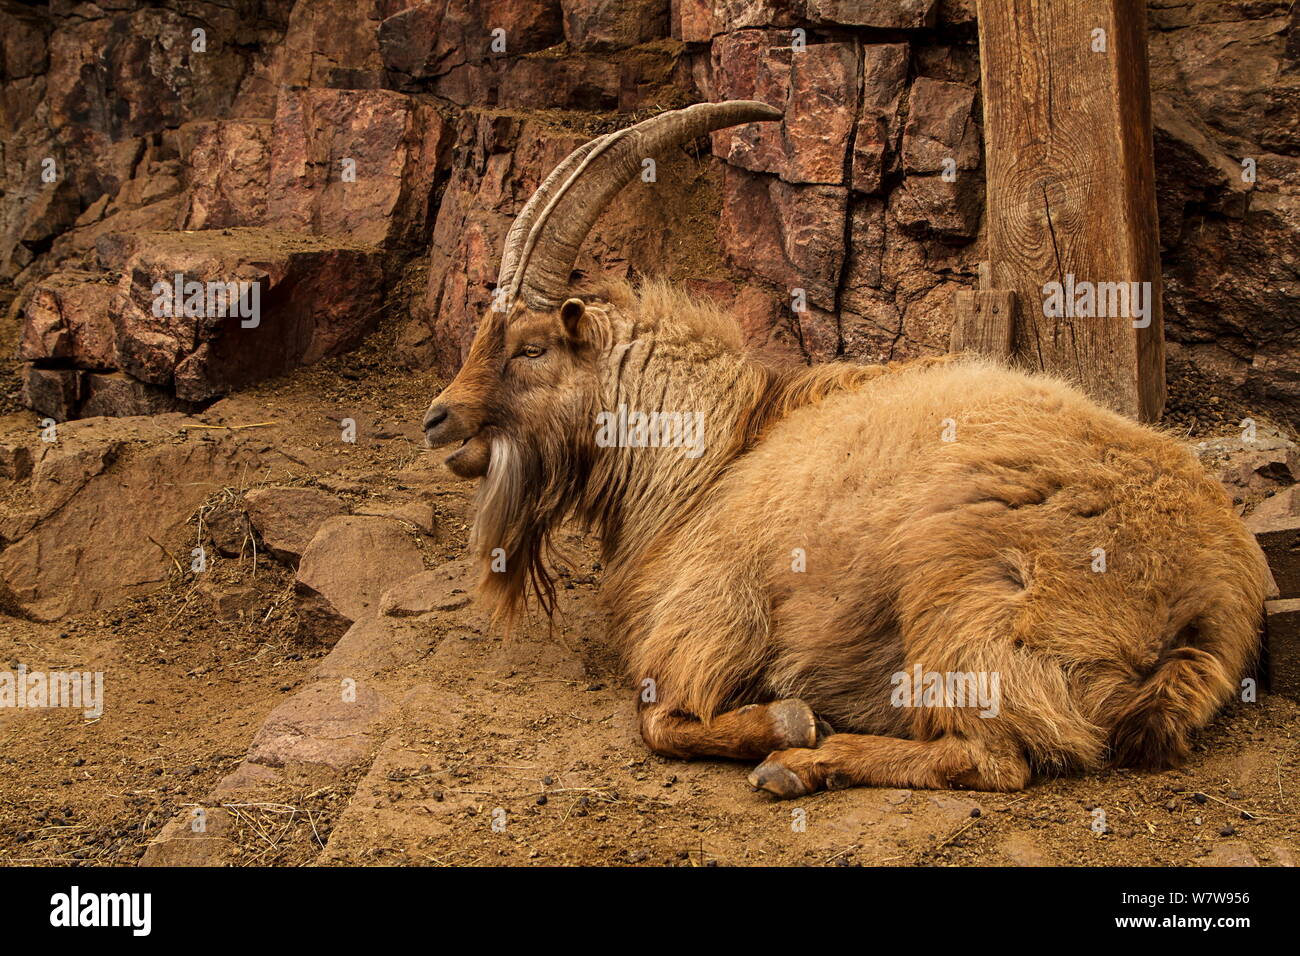 Wild red goat with long fur, beard, horns. Animal camouflage on brown stones background Stock Photo